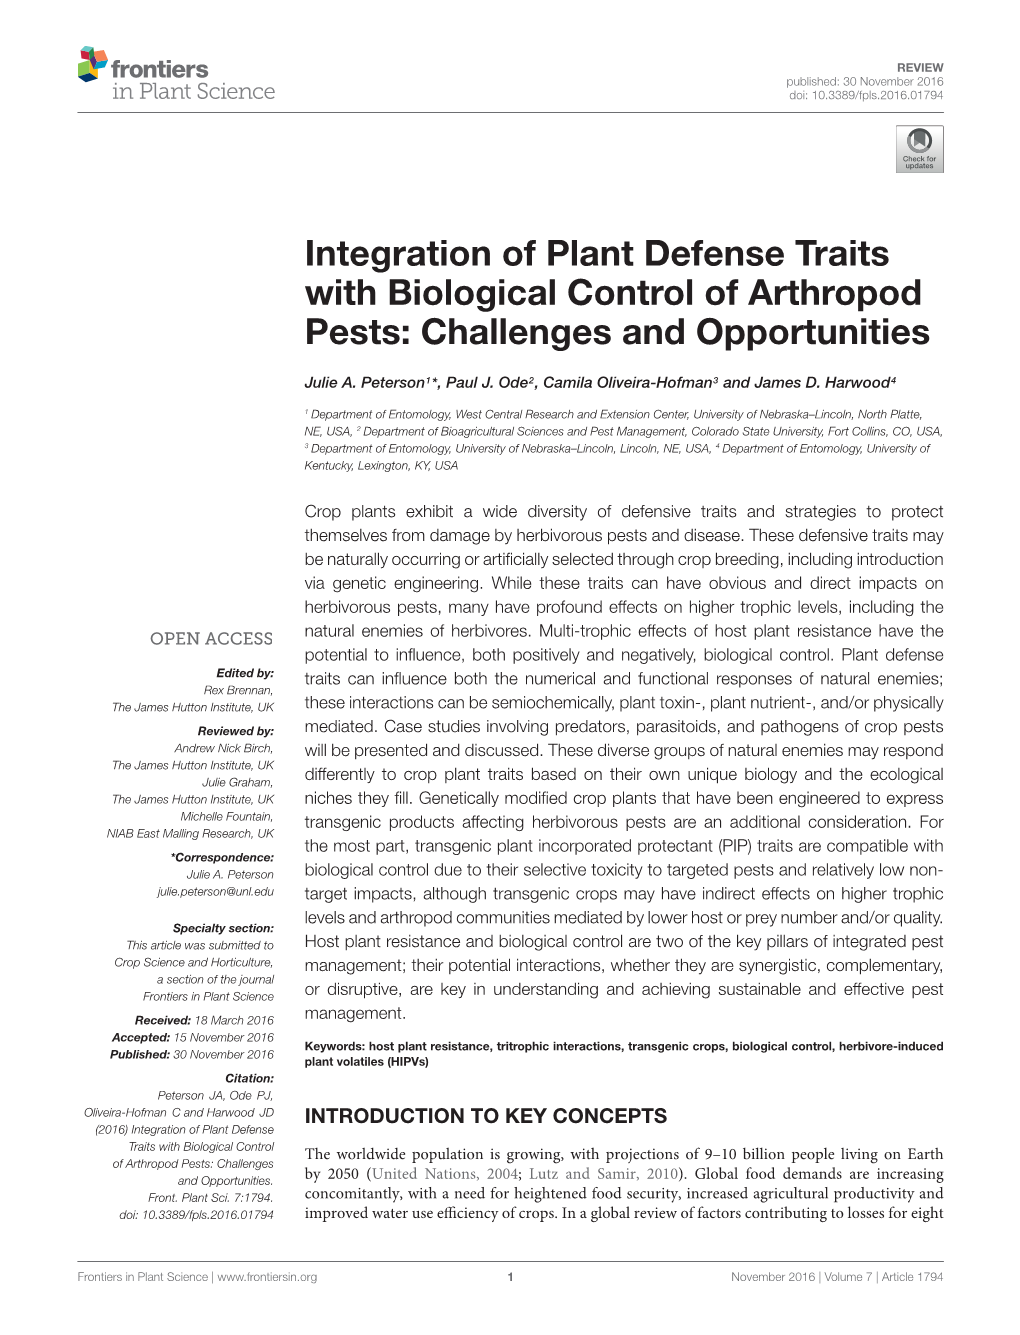 Integration of Plant Defense Traits with Biological Control of Arthropod Pests: Challenges and Opportunities